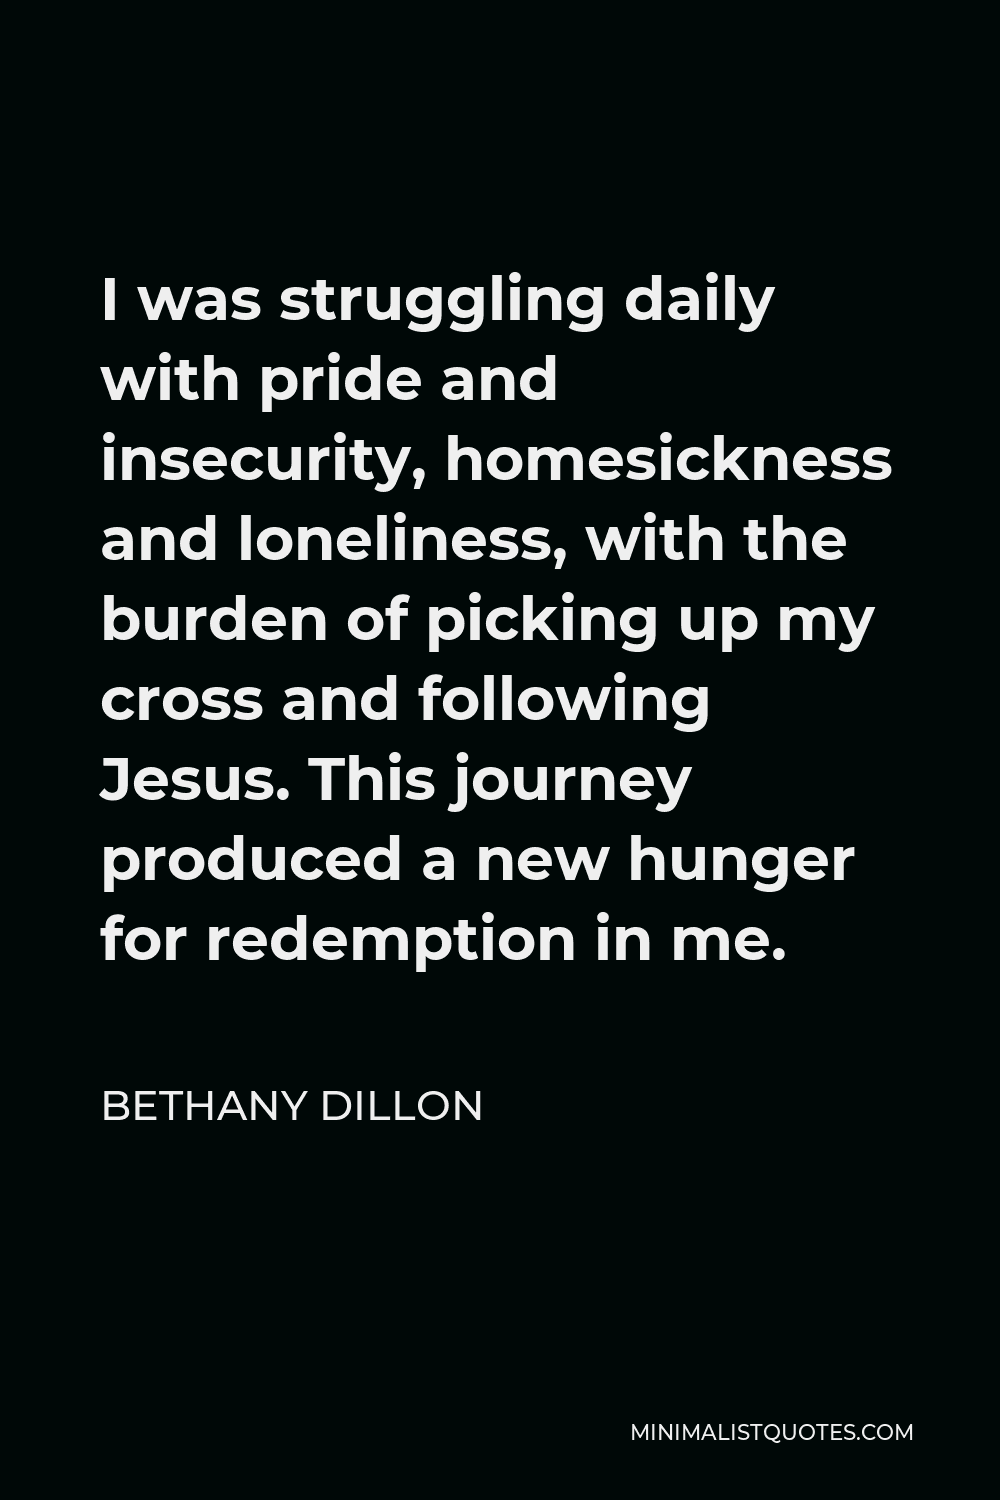 Bethany Dillon Quote - I was struggling daily with pride and insecurity, homesickness and loneliness, with the burden of picking up my cross and following Jesus. This journey produced a new hunger for redemption in me.